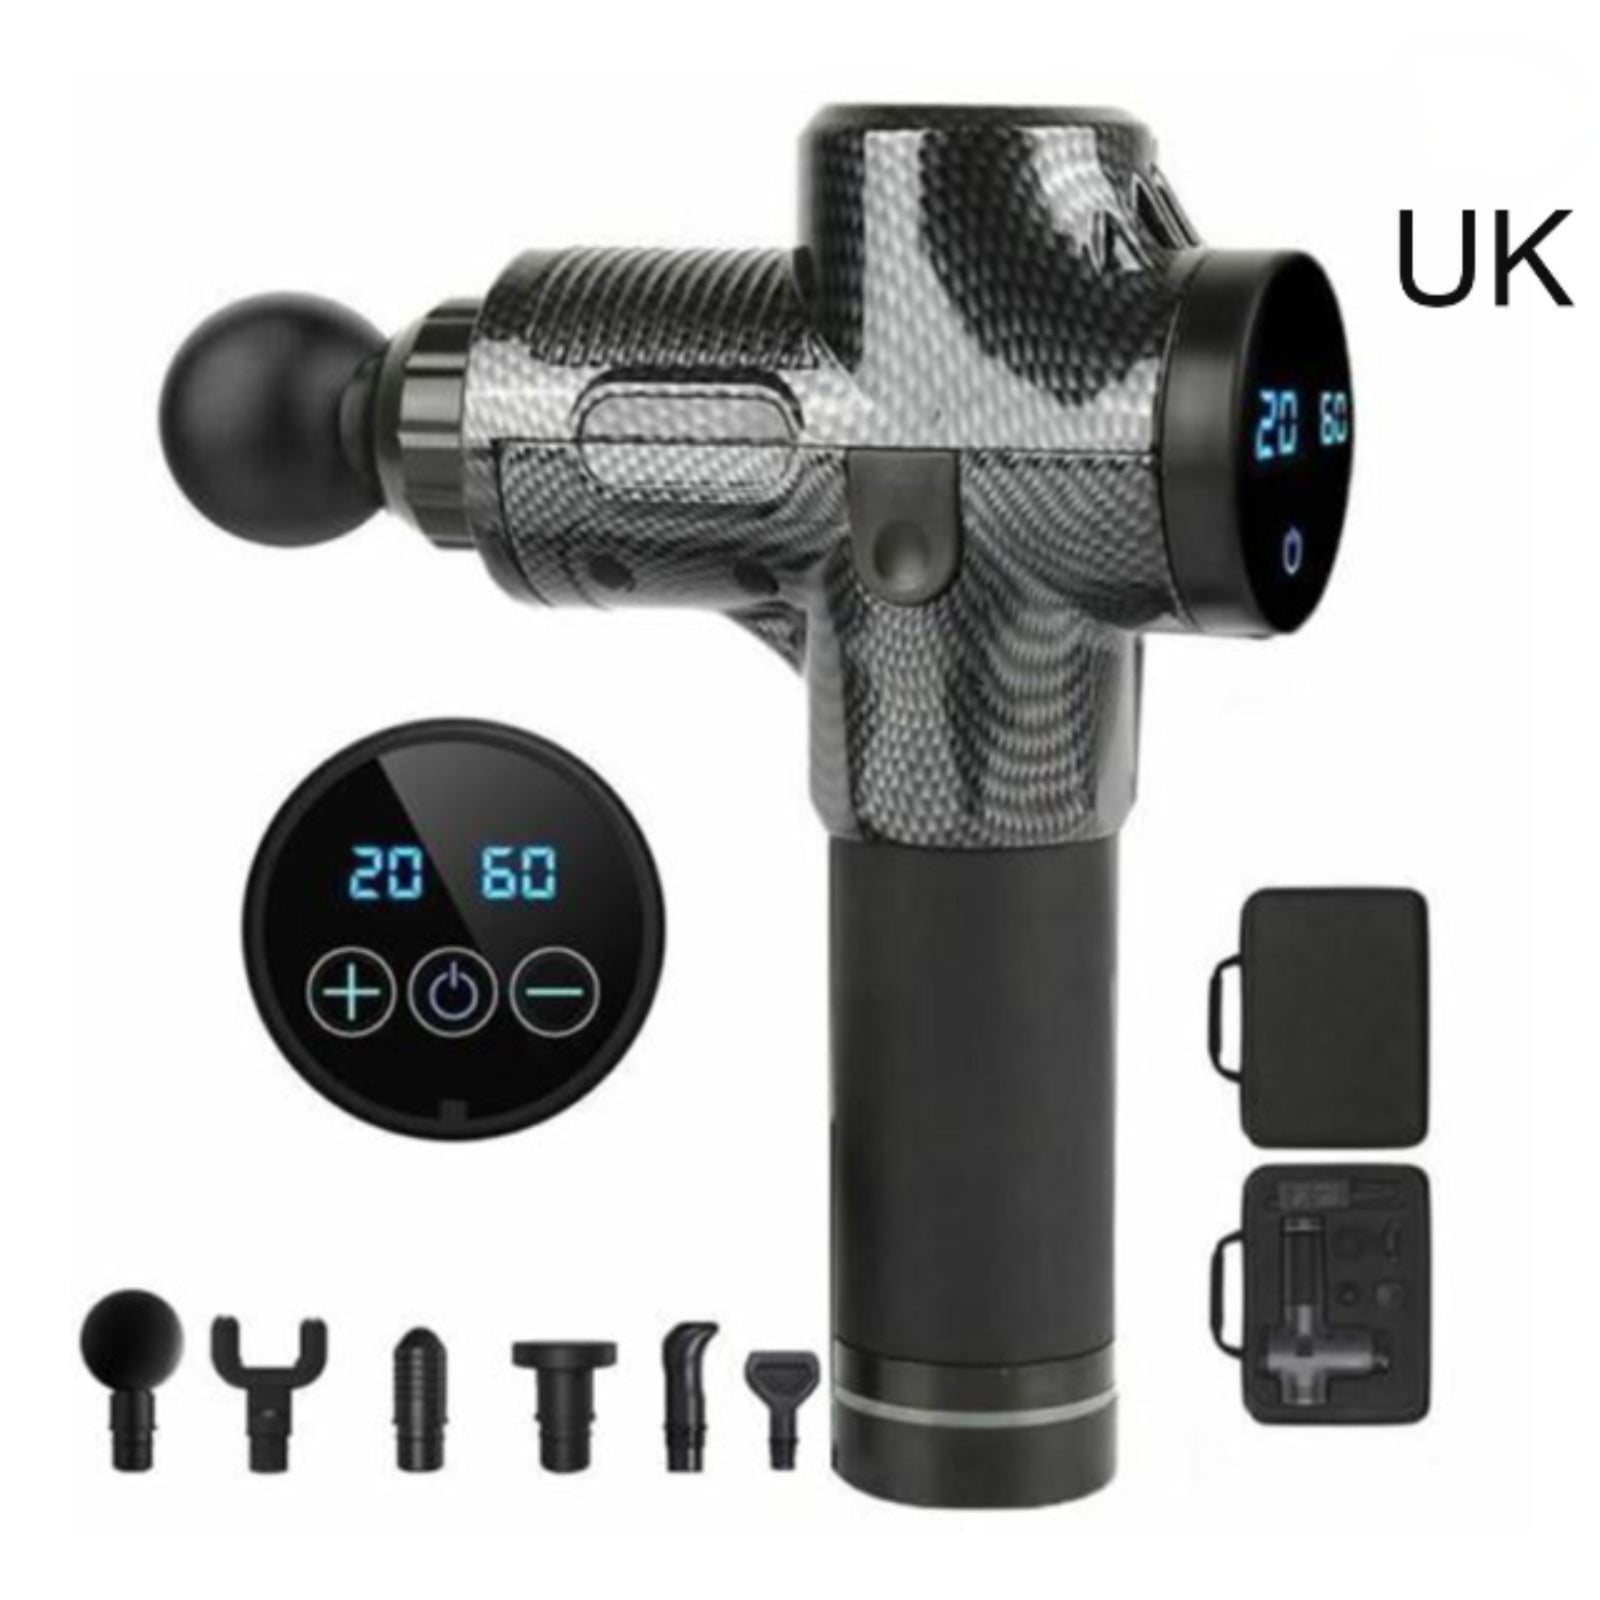 Relieve muscle soreness and tension instantly with our powerful and portable massage gun. Whether you're an athlete, fitness enthusiast, or just someone looking to relax, this Deep Body Massager can provide instant relief from soreness and tension in your muscles. UK PLUG